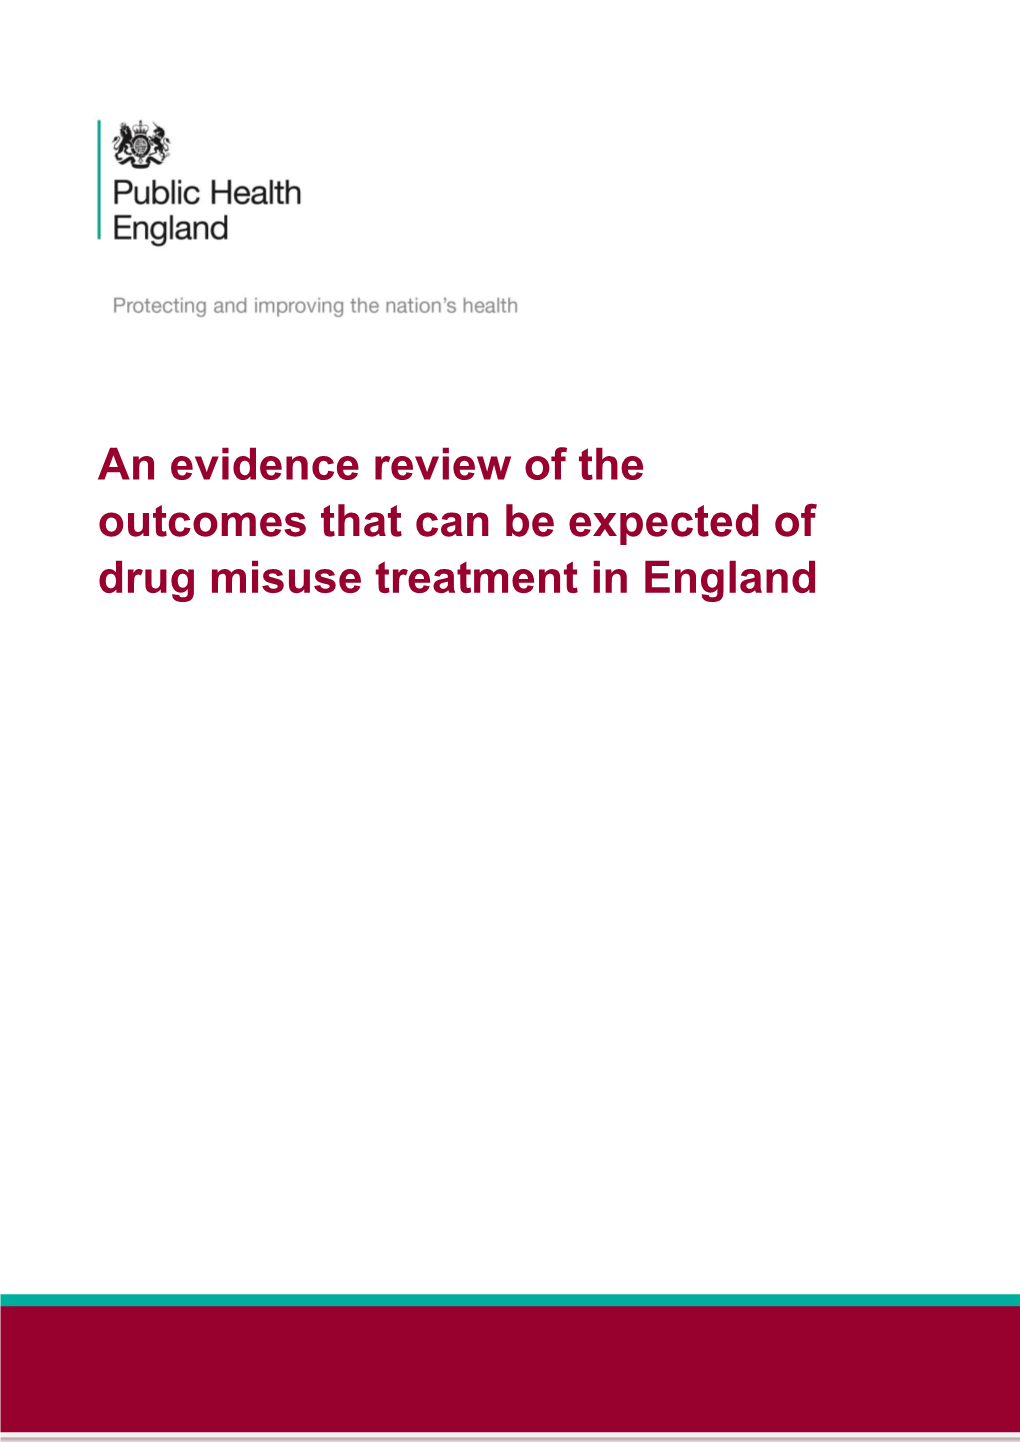 An Evidence Review of the Outcomes That Can Be Expected of Drug Misuse Treatment in England